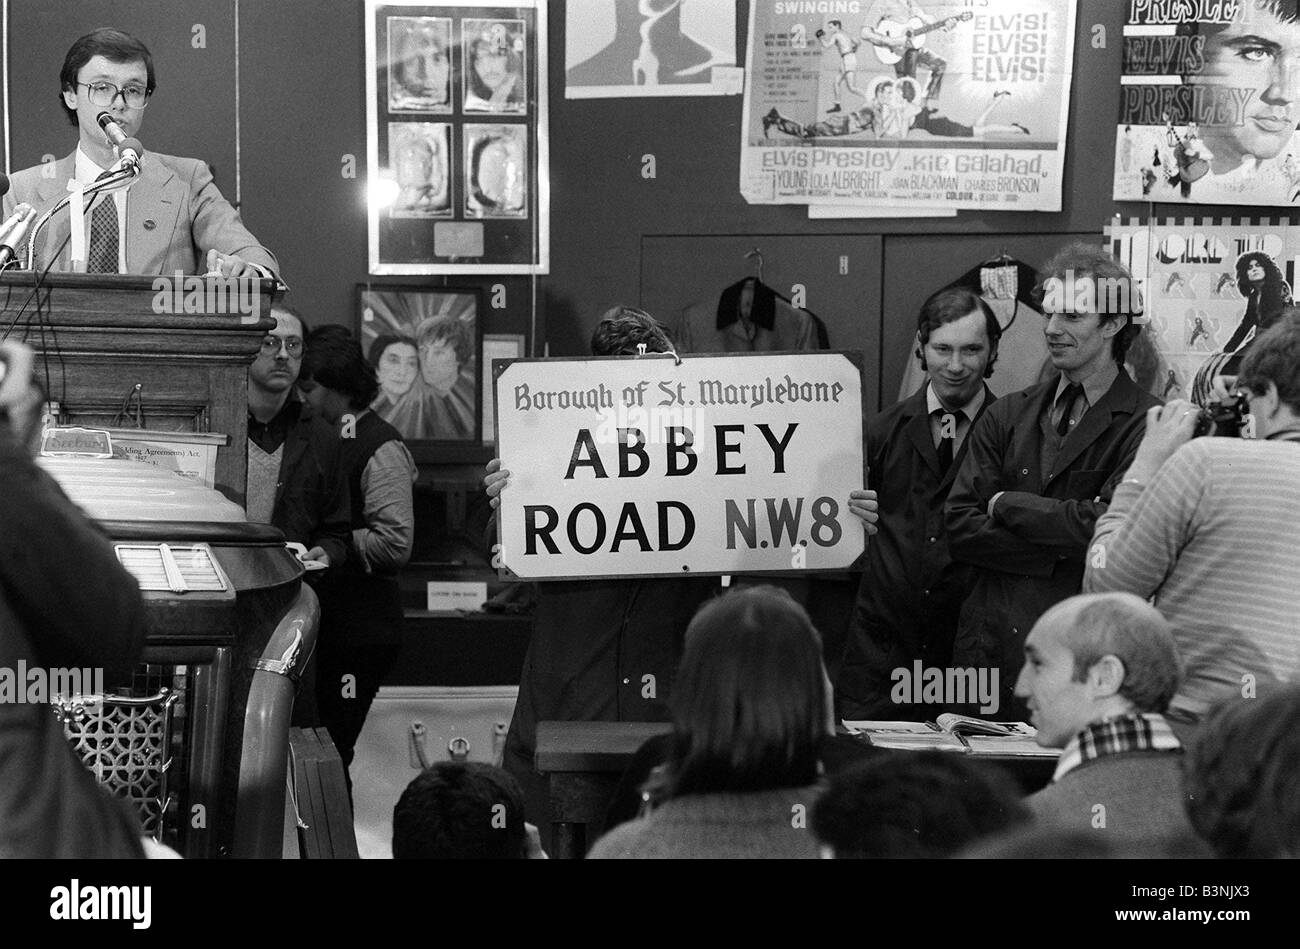 The Beatles Memorabilia Auction Beatlemania Again This time it was the first ever Rock N Roll auction at Sotheby s Belgravia The Abbey Road N W 8 Street Sign being auctioned Match 1981 Stock Photo